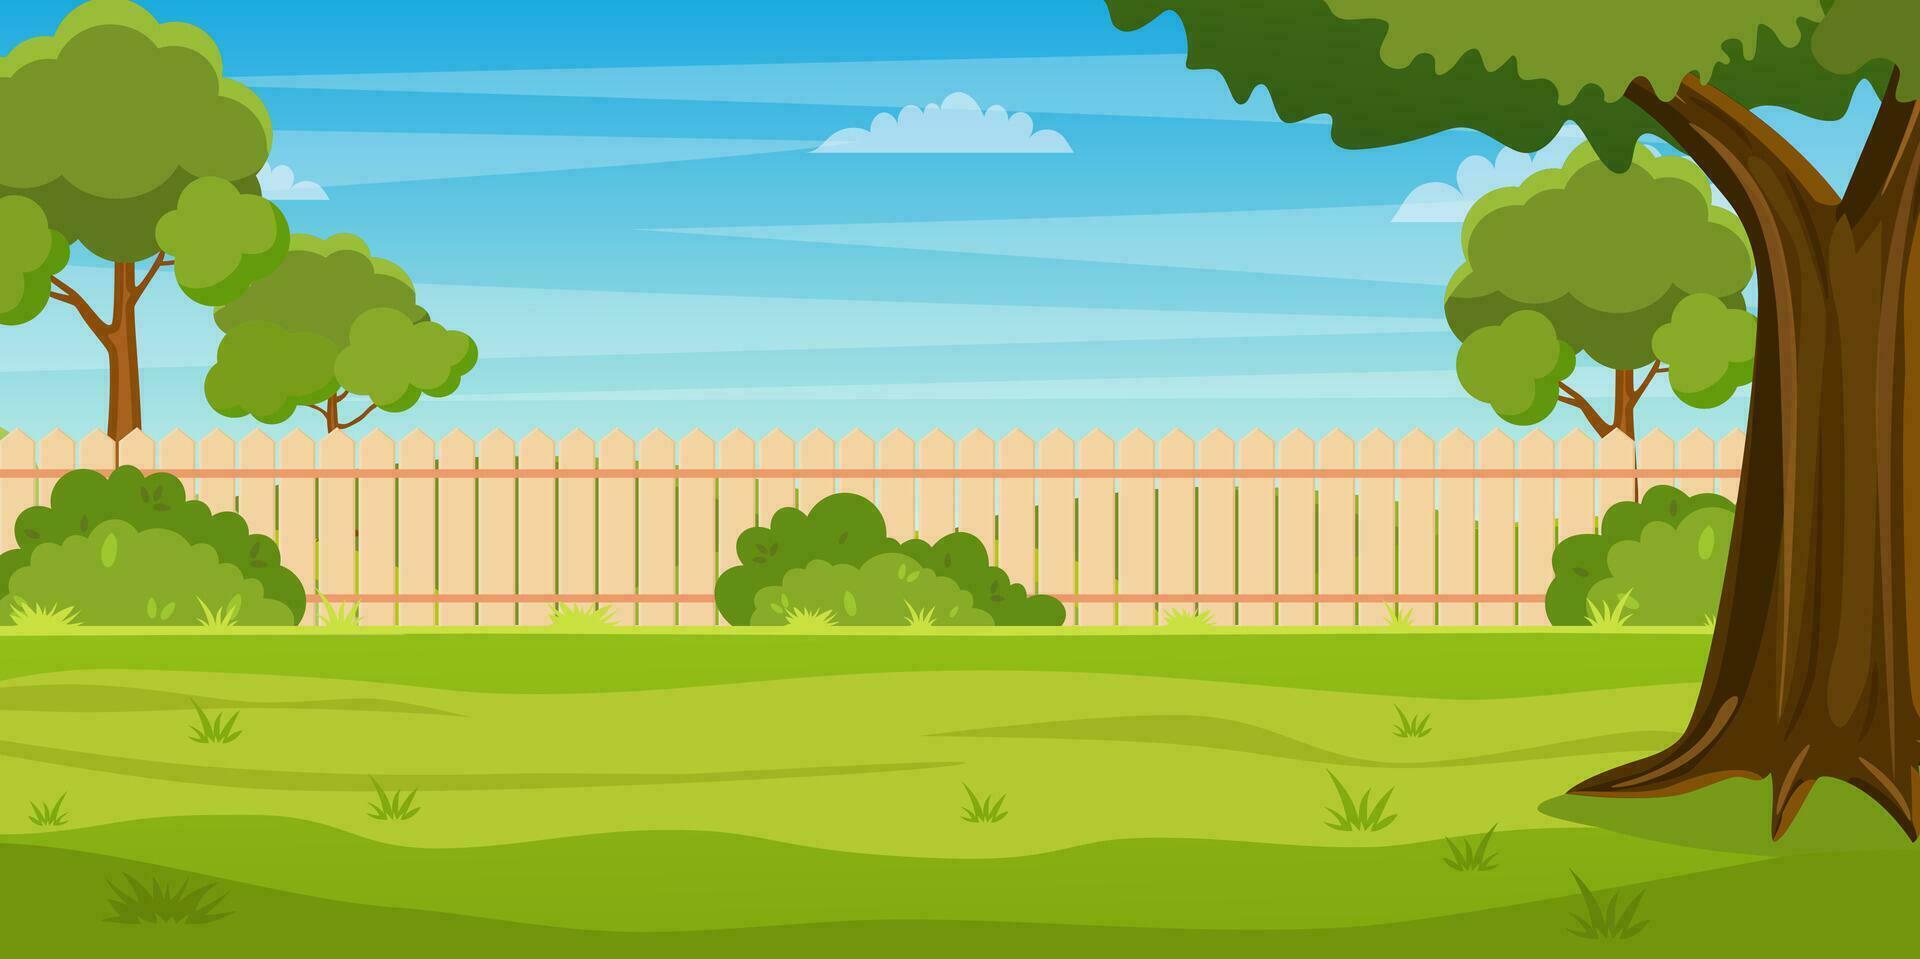 Garden backyard with wooden fence hedge, green trees and bushes, grass , park plants. Spring or summer landscape. Patio area for BBQ summer parties. Vector illustration in flat style